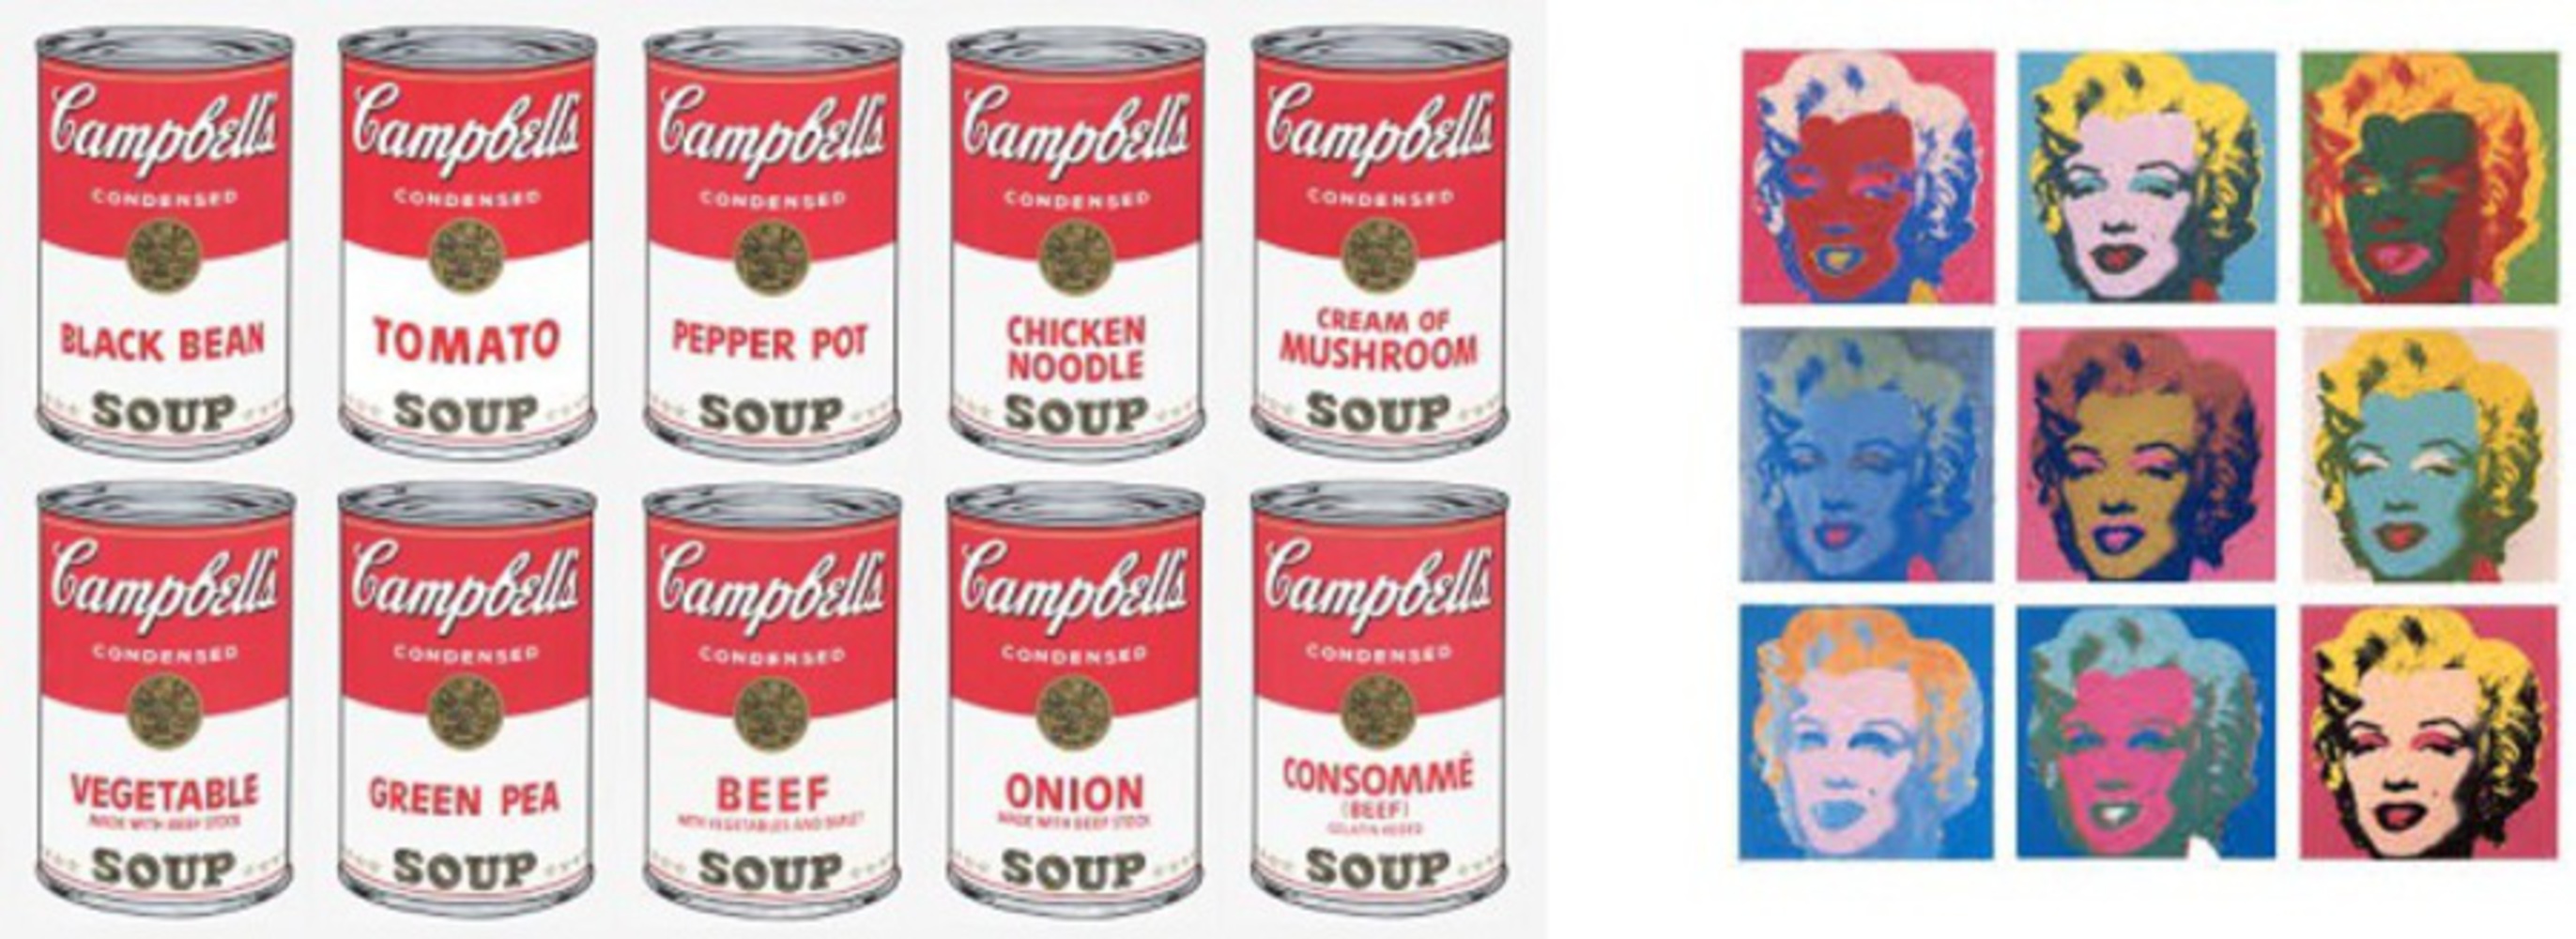 Campbell soup marilyn.thumb